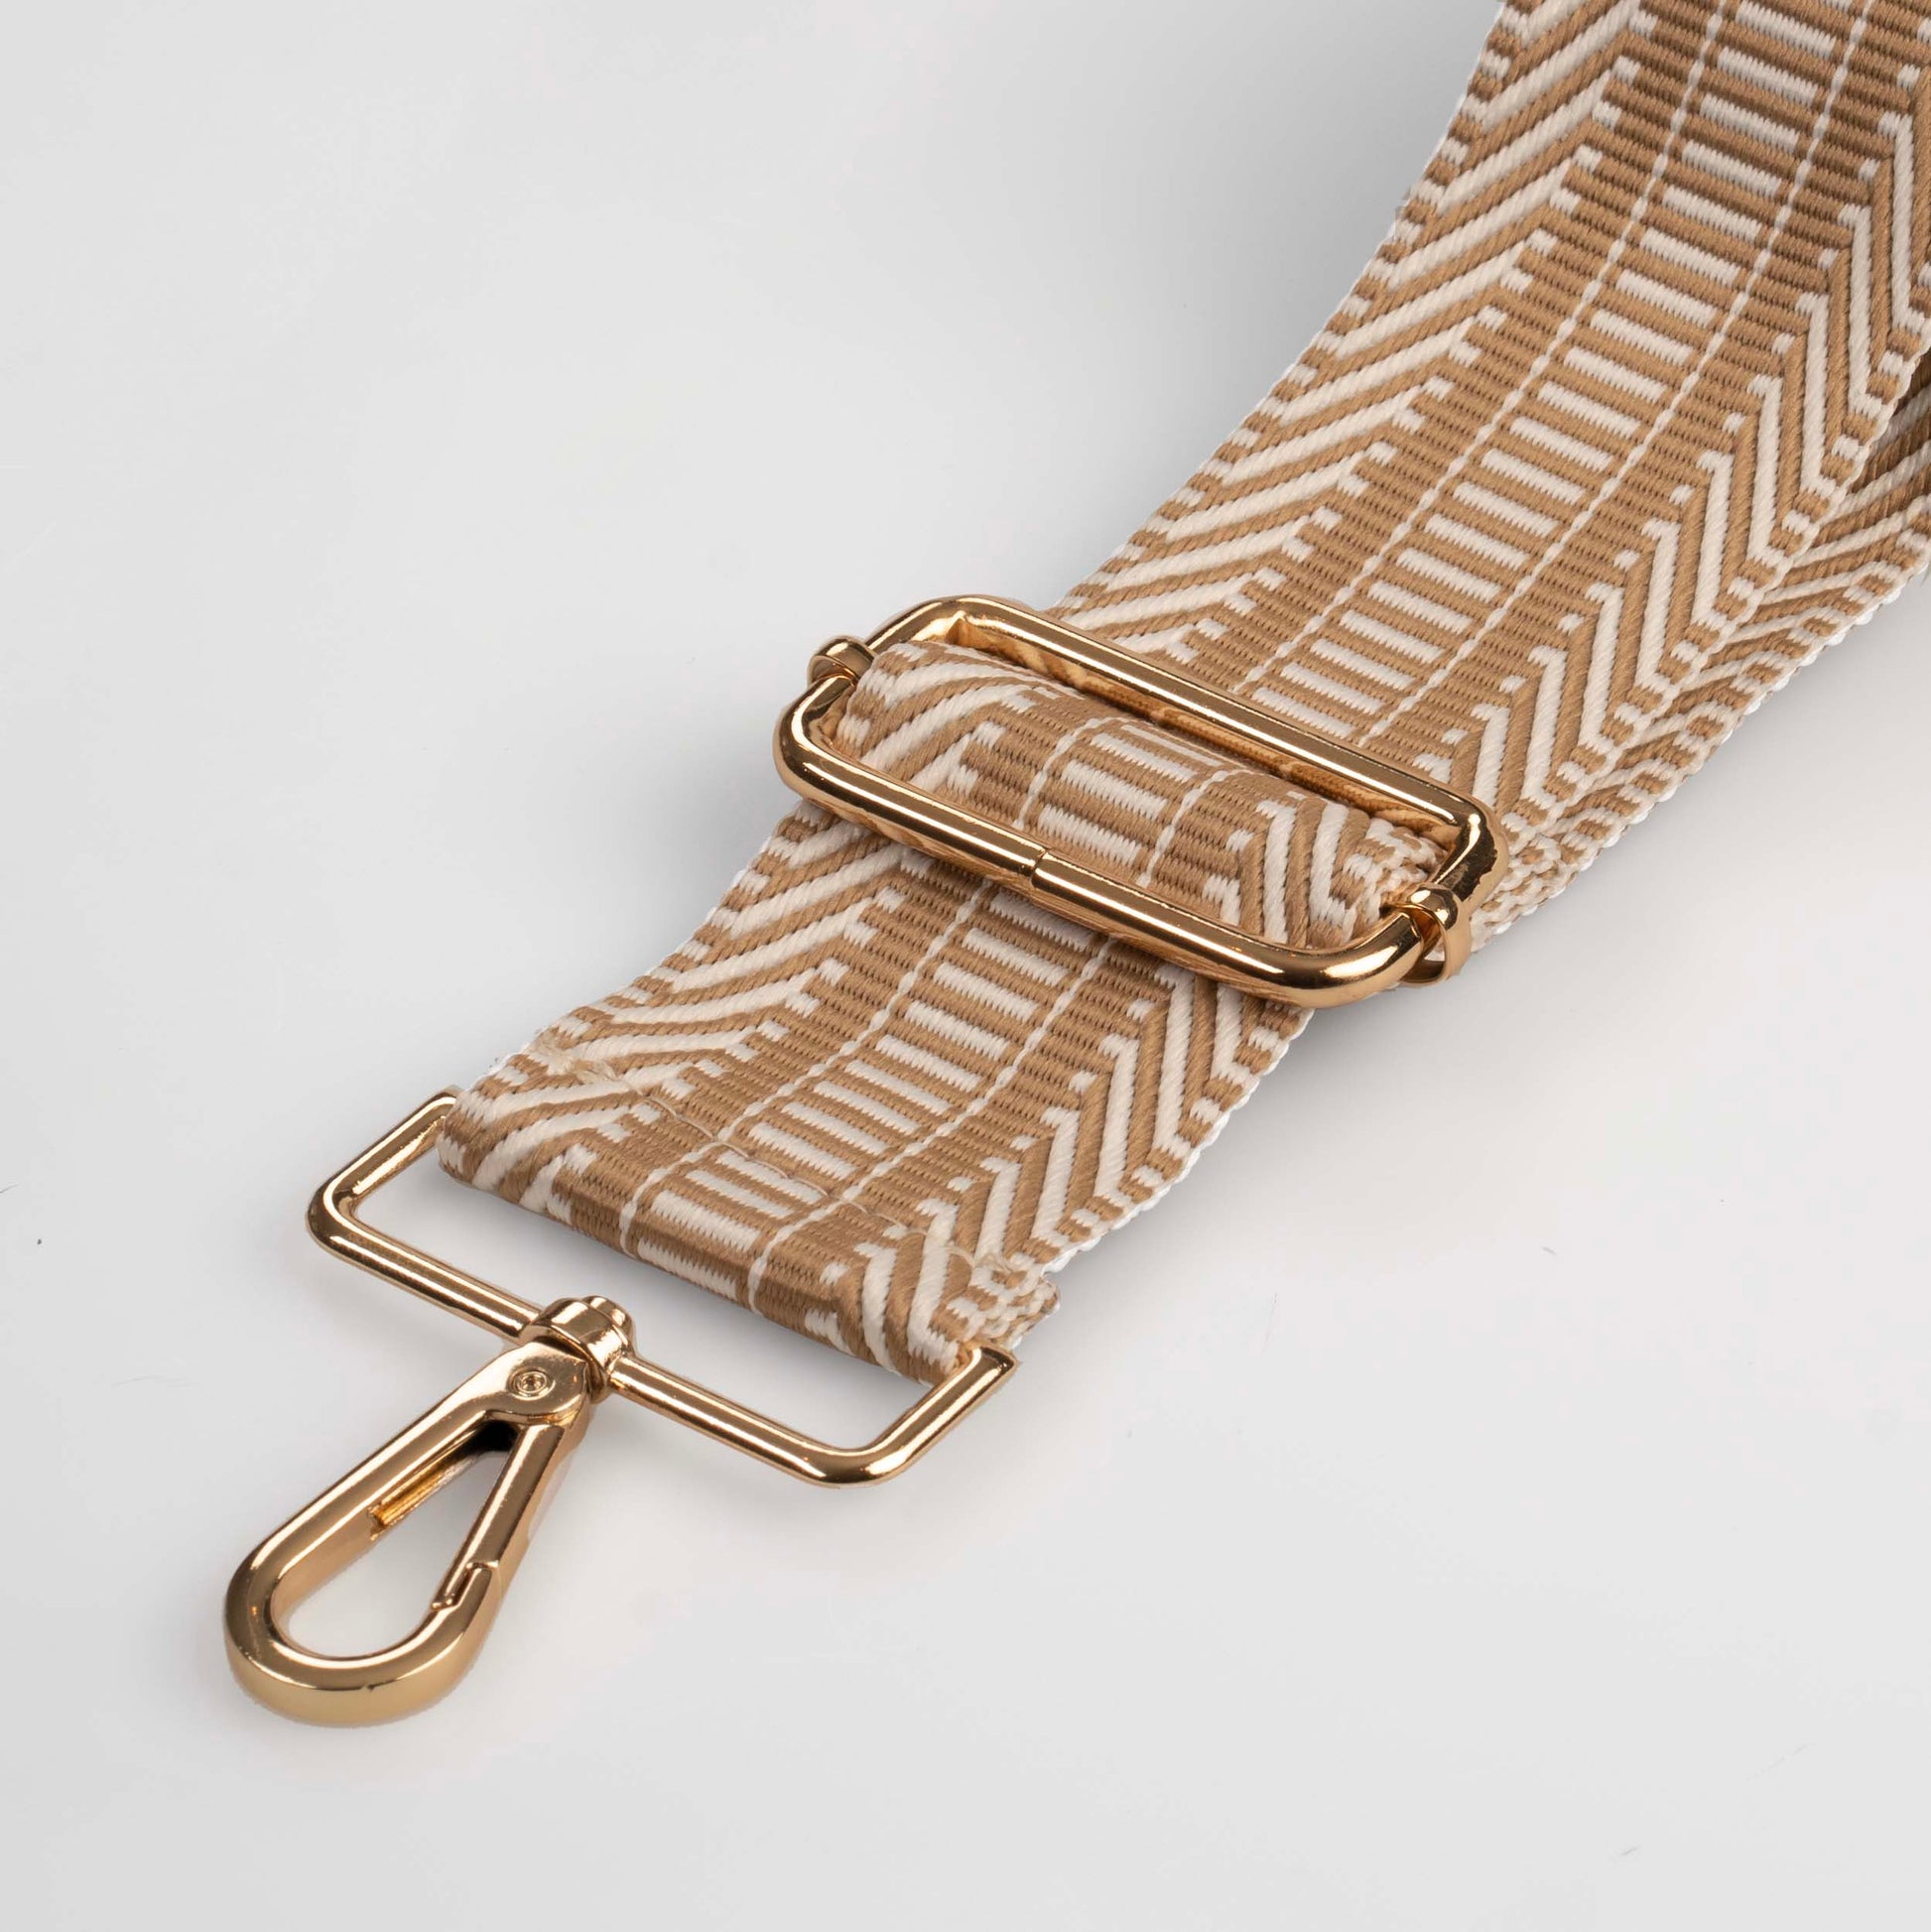 Stone Patterned Bag Strap by Swoon London